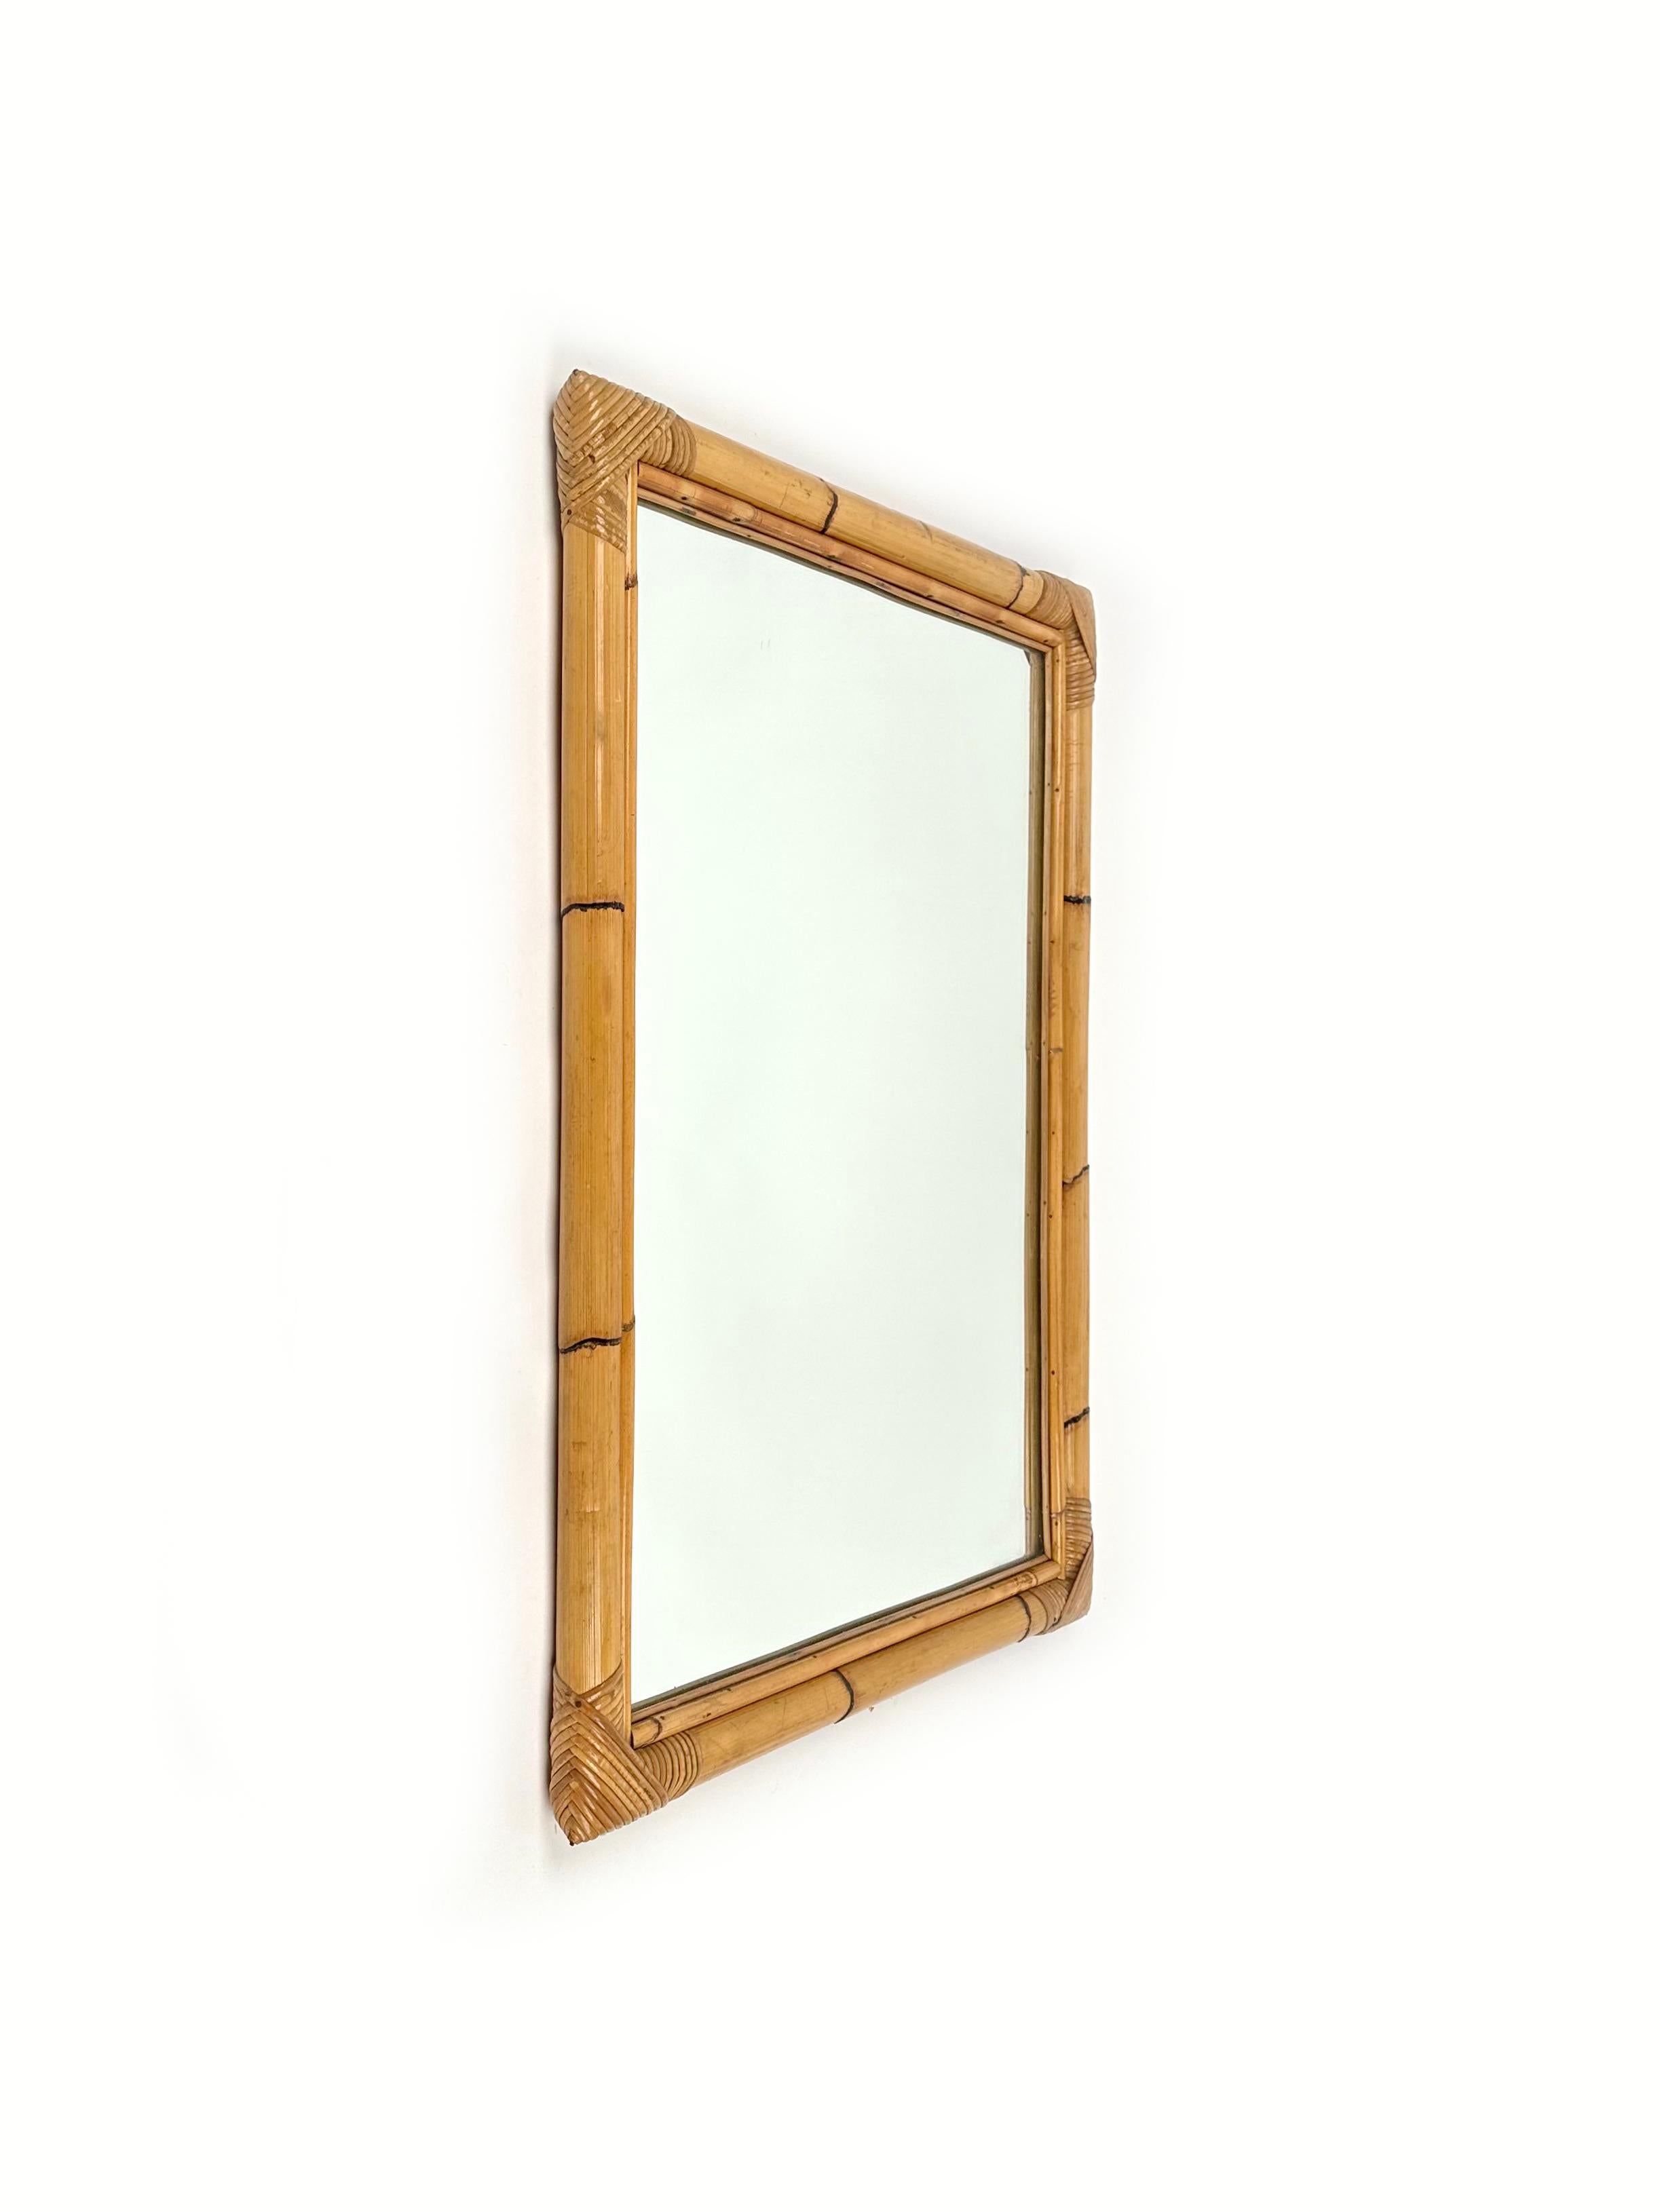 Beautiful rectangular wall mirror in bamboo and rattan.

The corners are lashed together and protected with rattan strands. Incredibly stylish, it can add a real focal point to any room with considerable decorative effect.


Made in Italy in